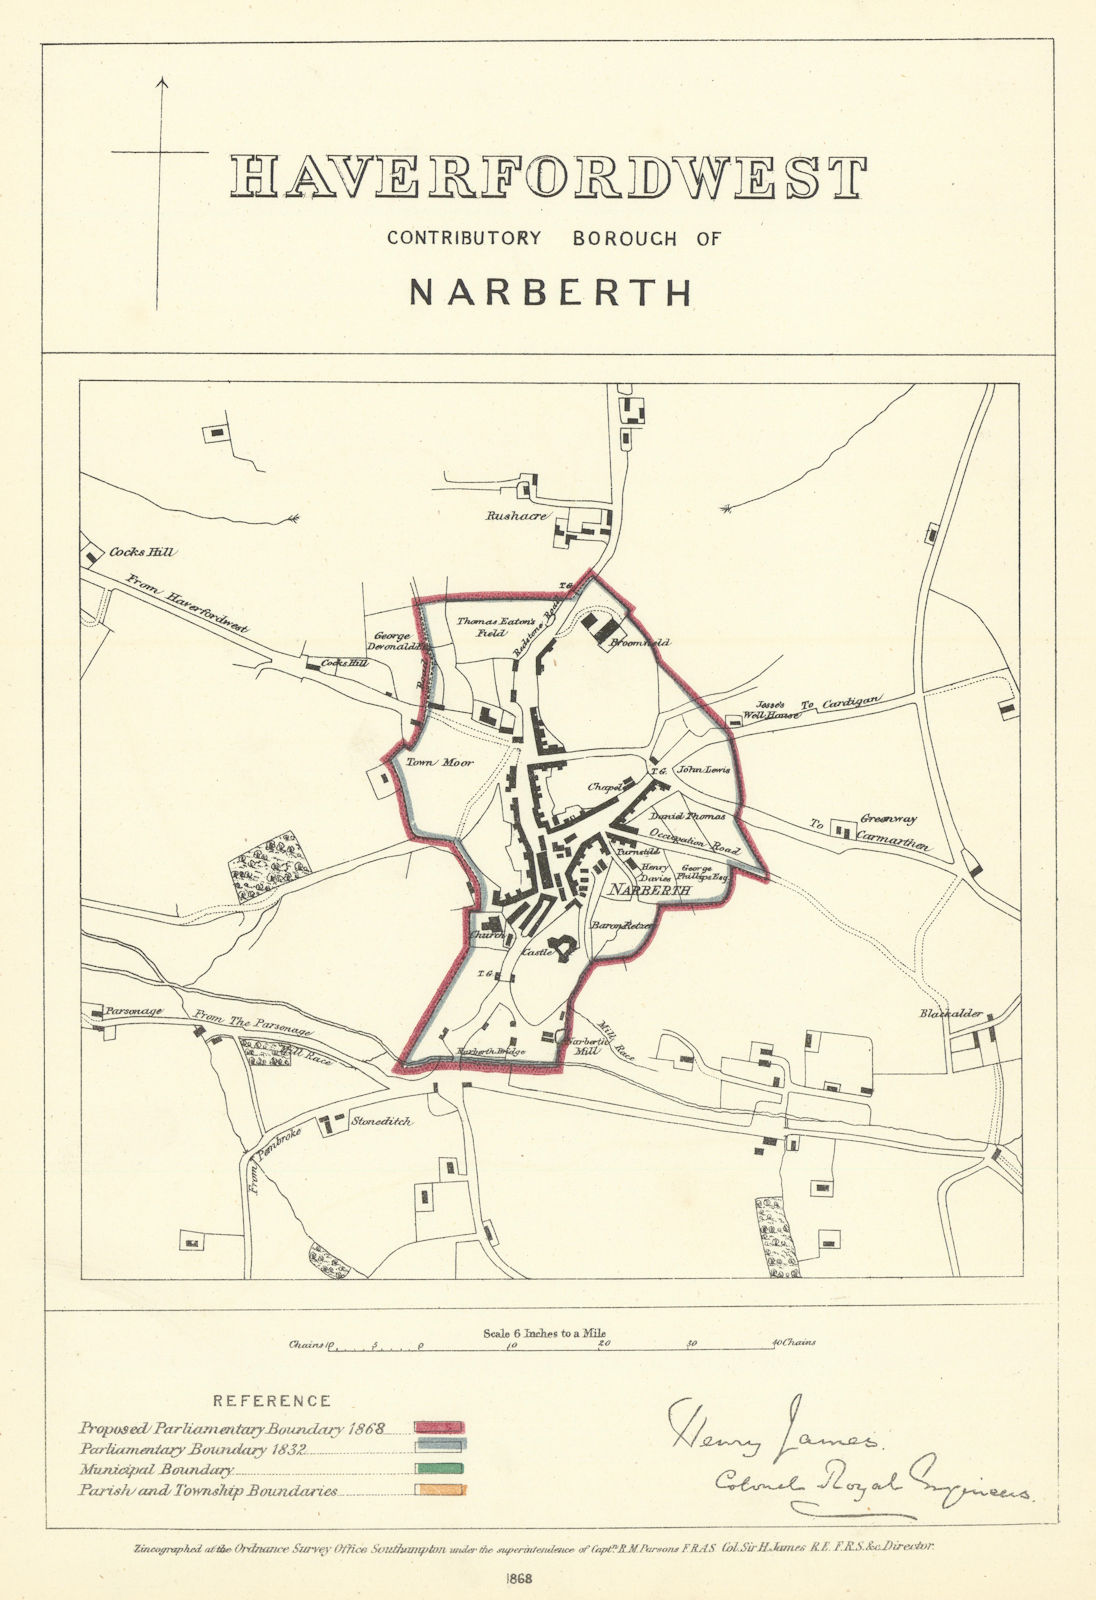 Associate Product Haverfordwest Contrib'y Borough of Narberth. JAMES. Boundary Commission 1868 map